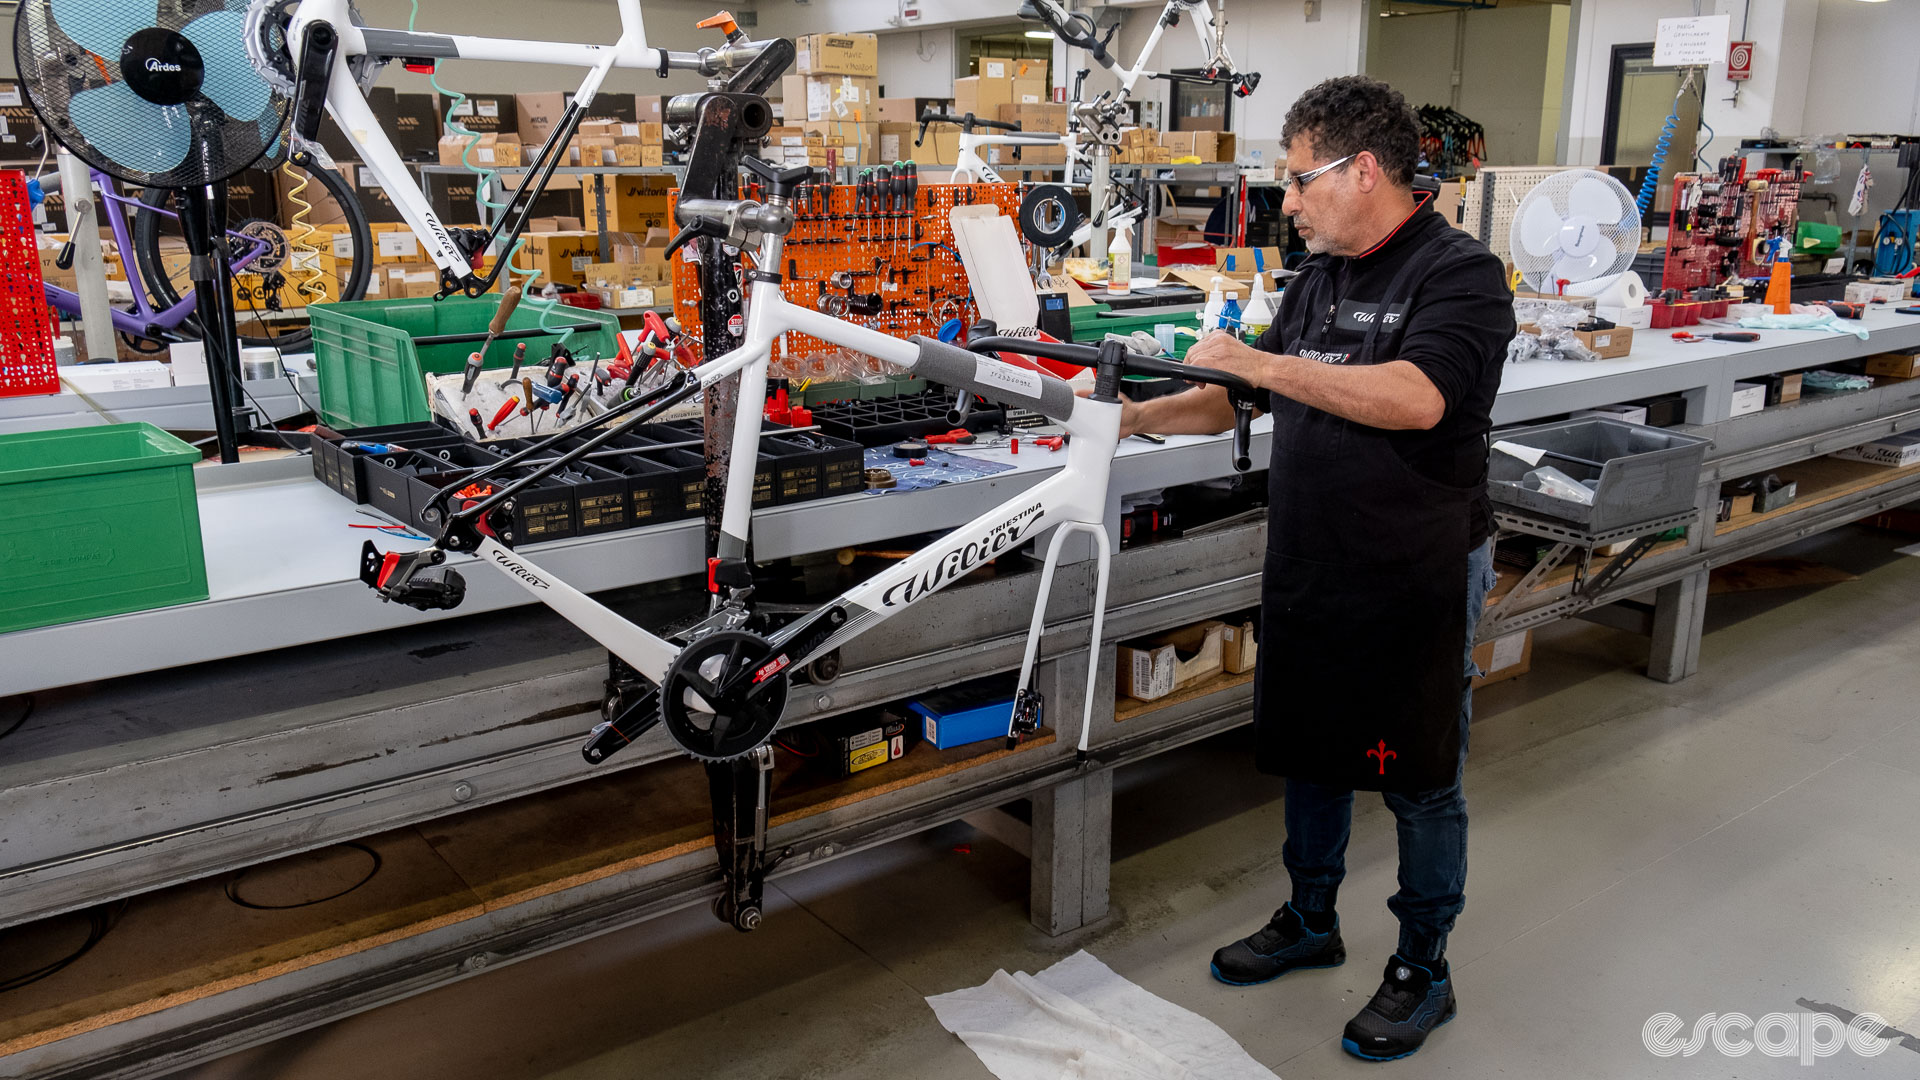 The photo shows a mechanic working at the Wilier assembly line.